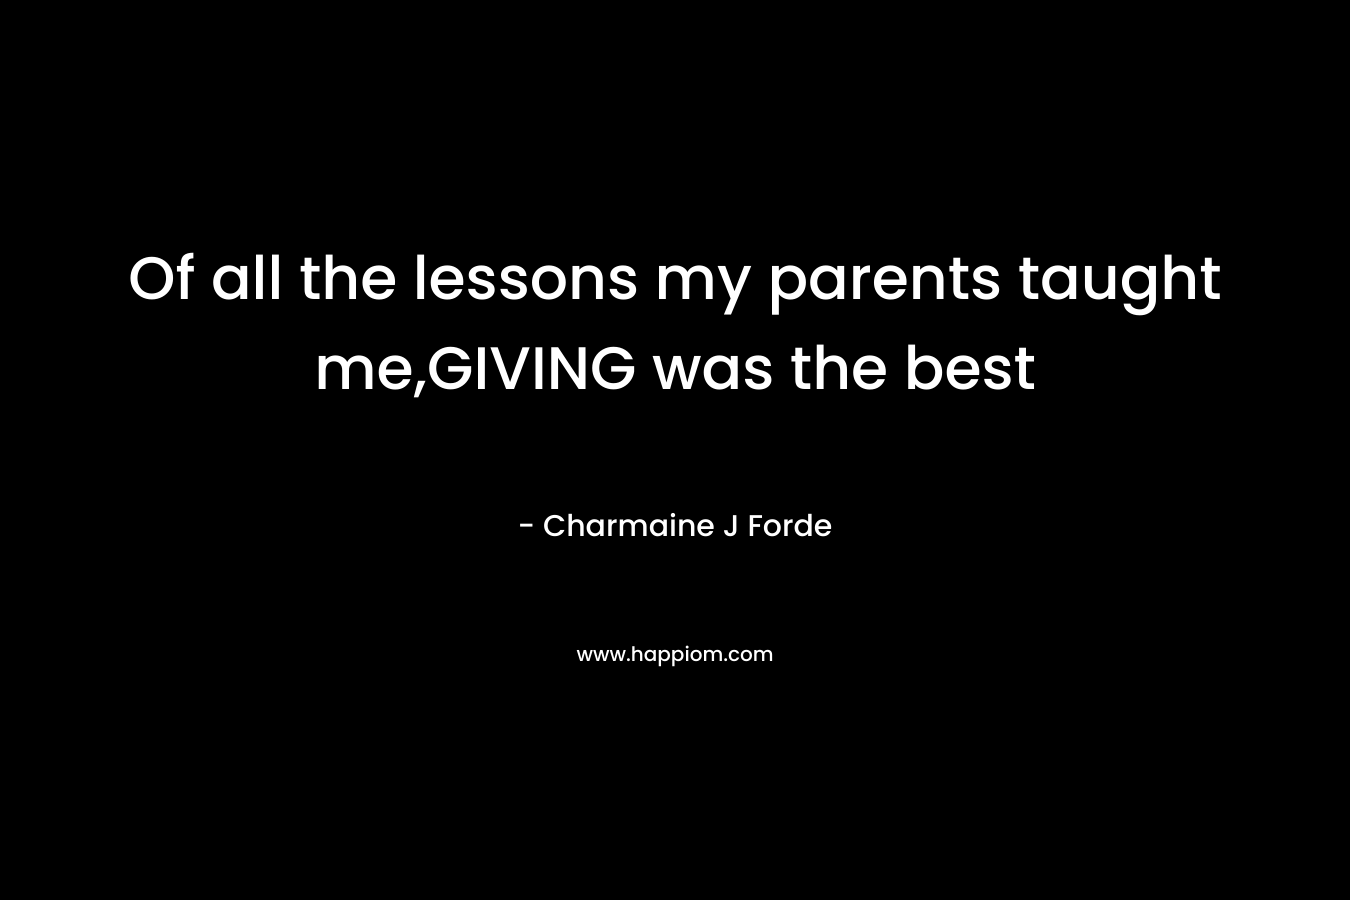 Of all the lessons my parents taught me,GIVING was the best – Charmaine J Forde